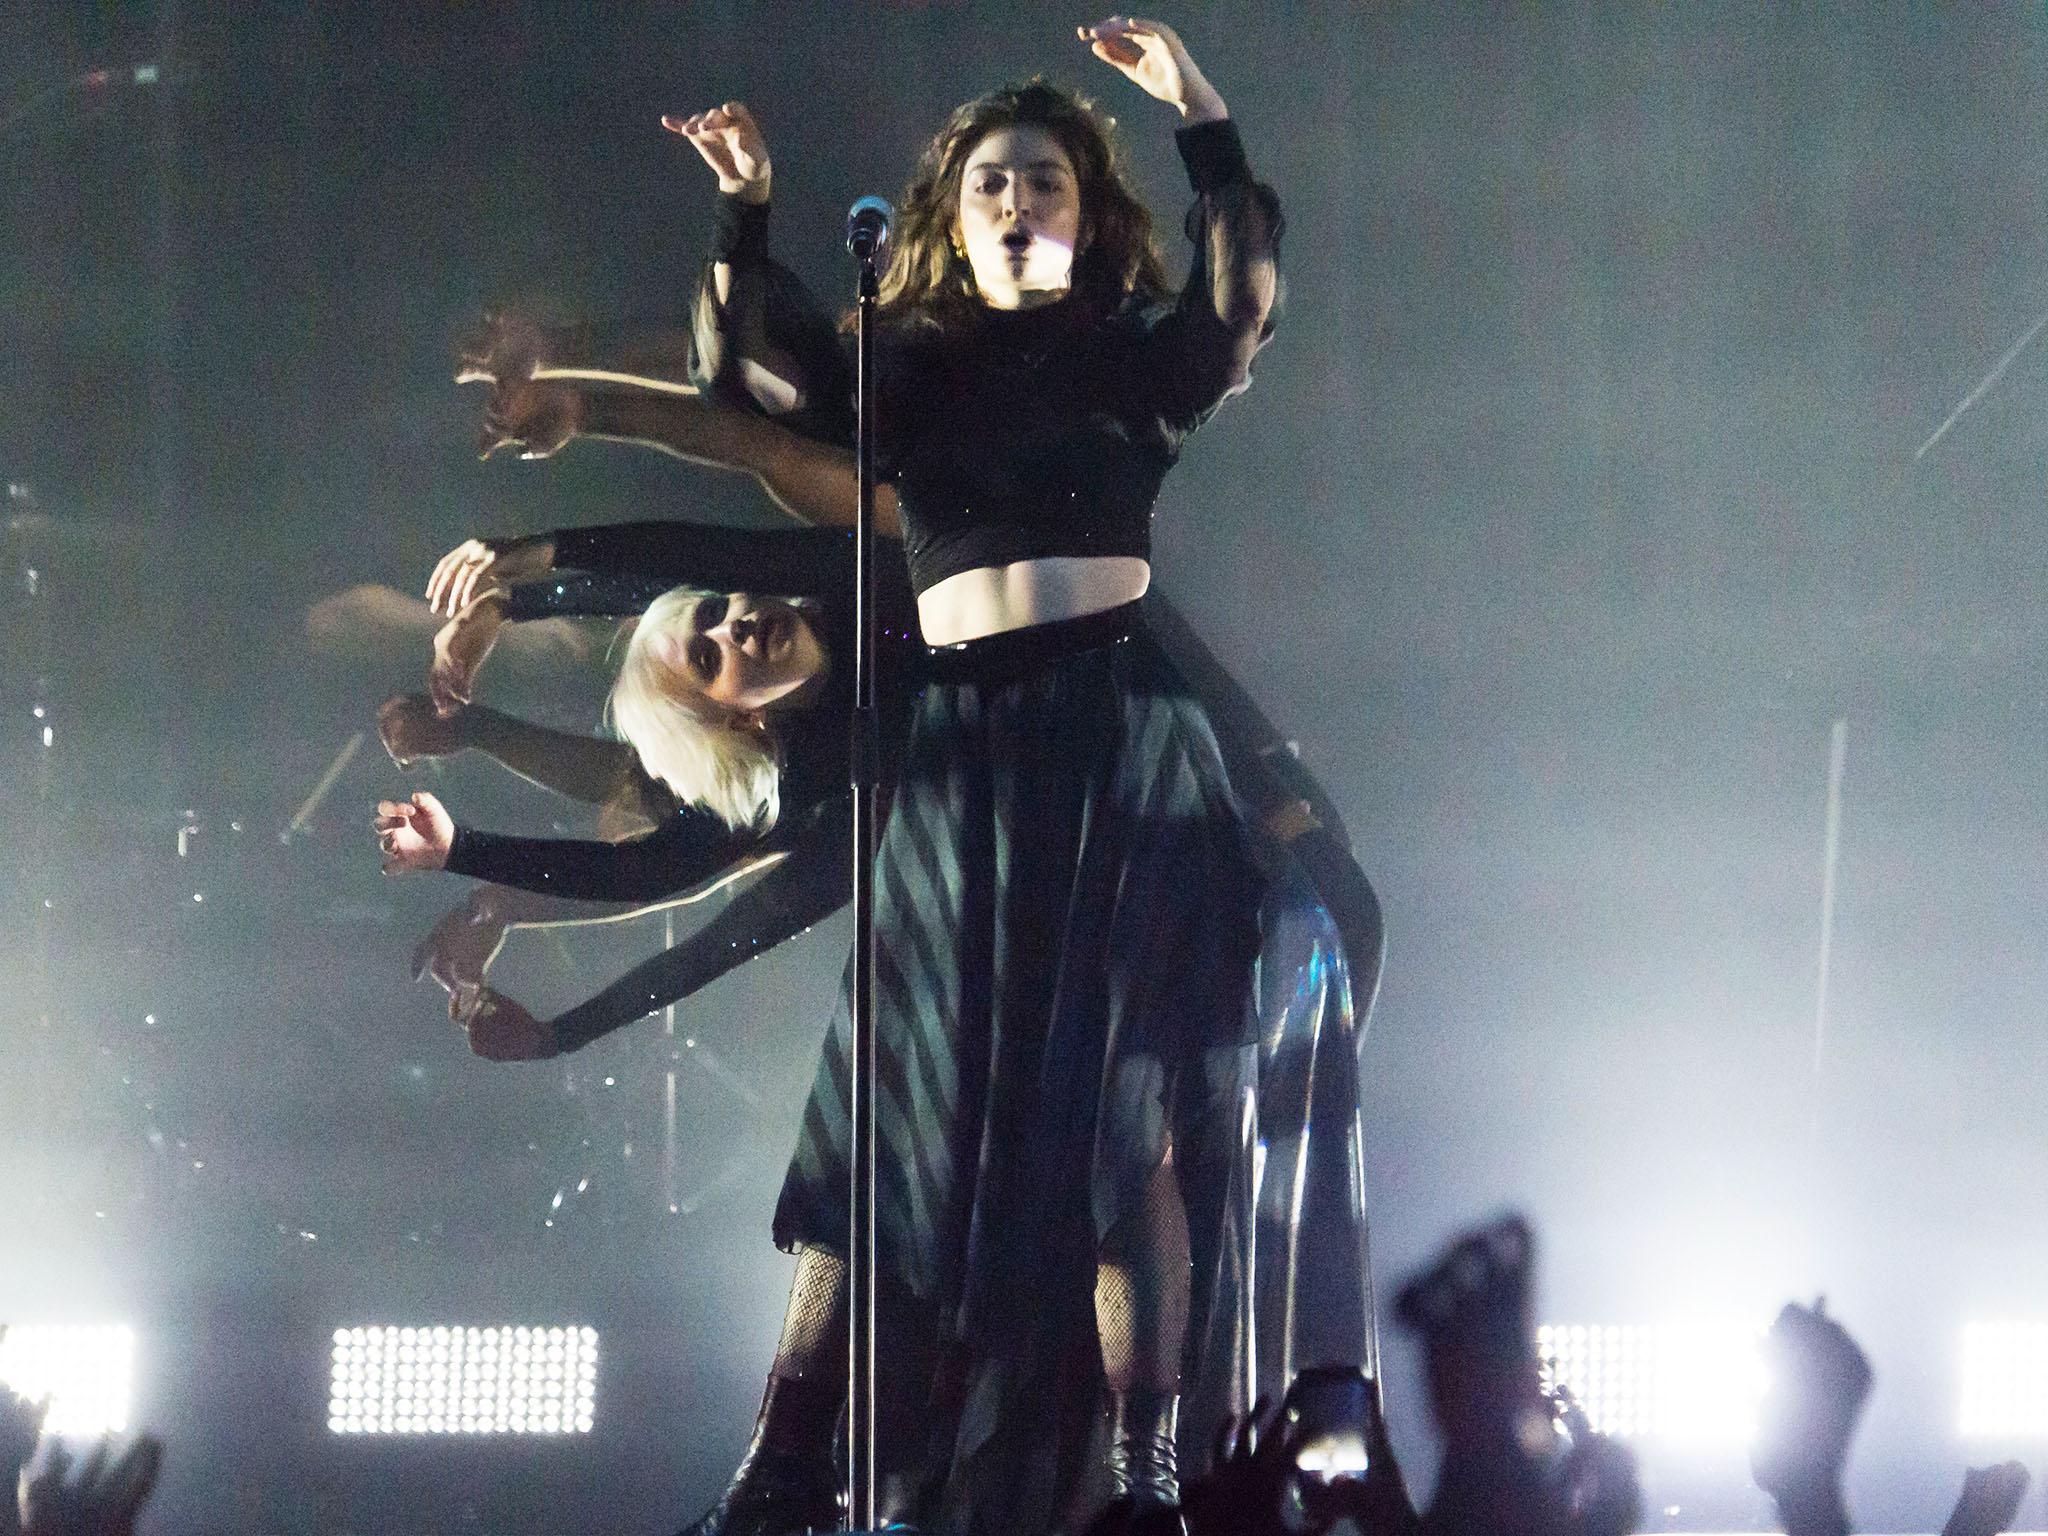 Lorde performs at Alexandra Palace in London